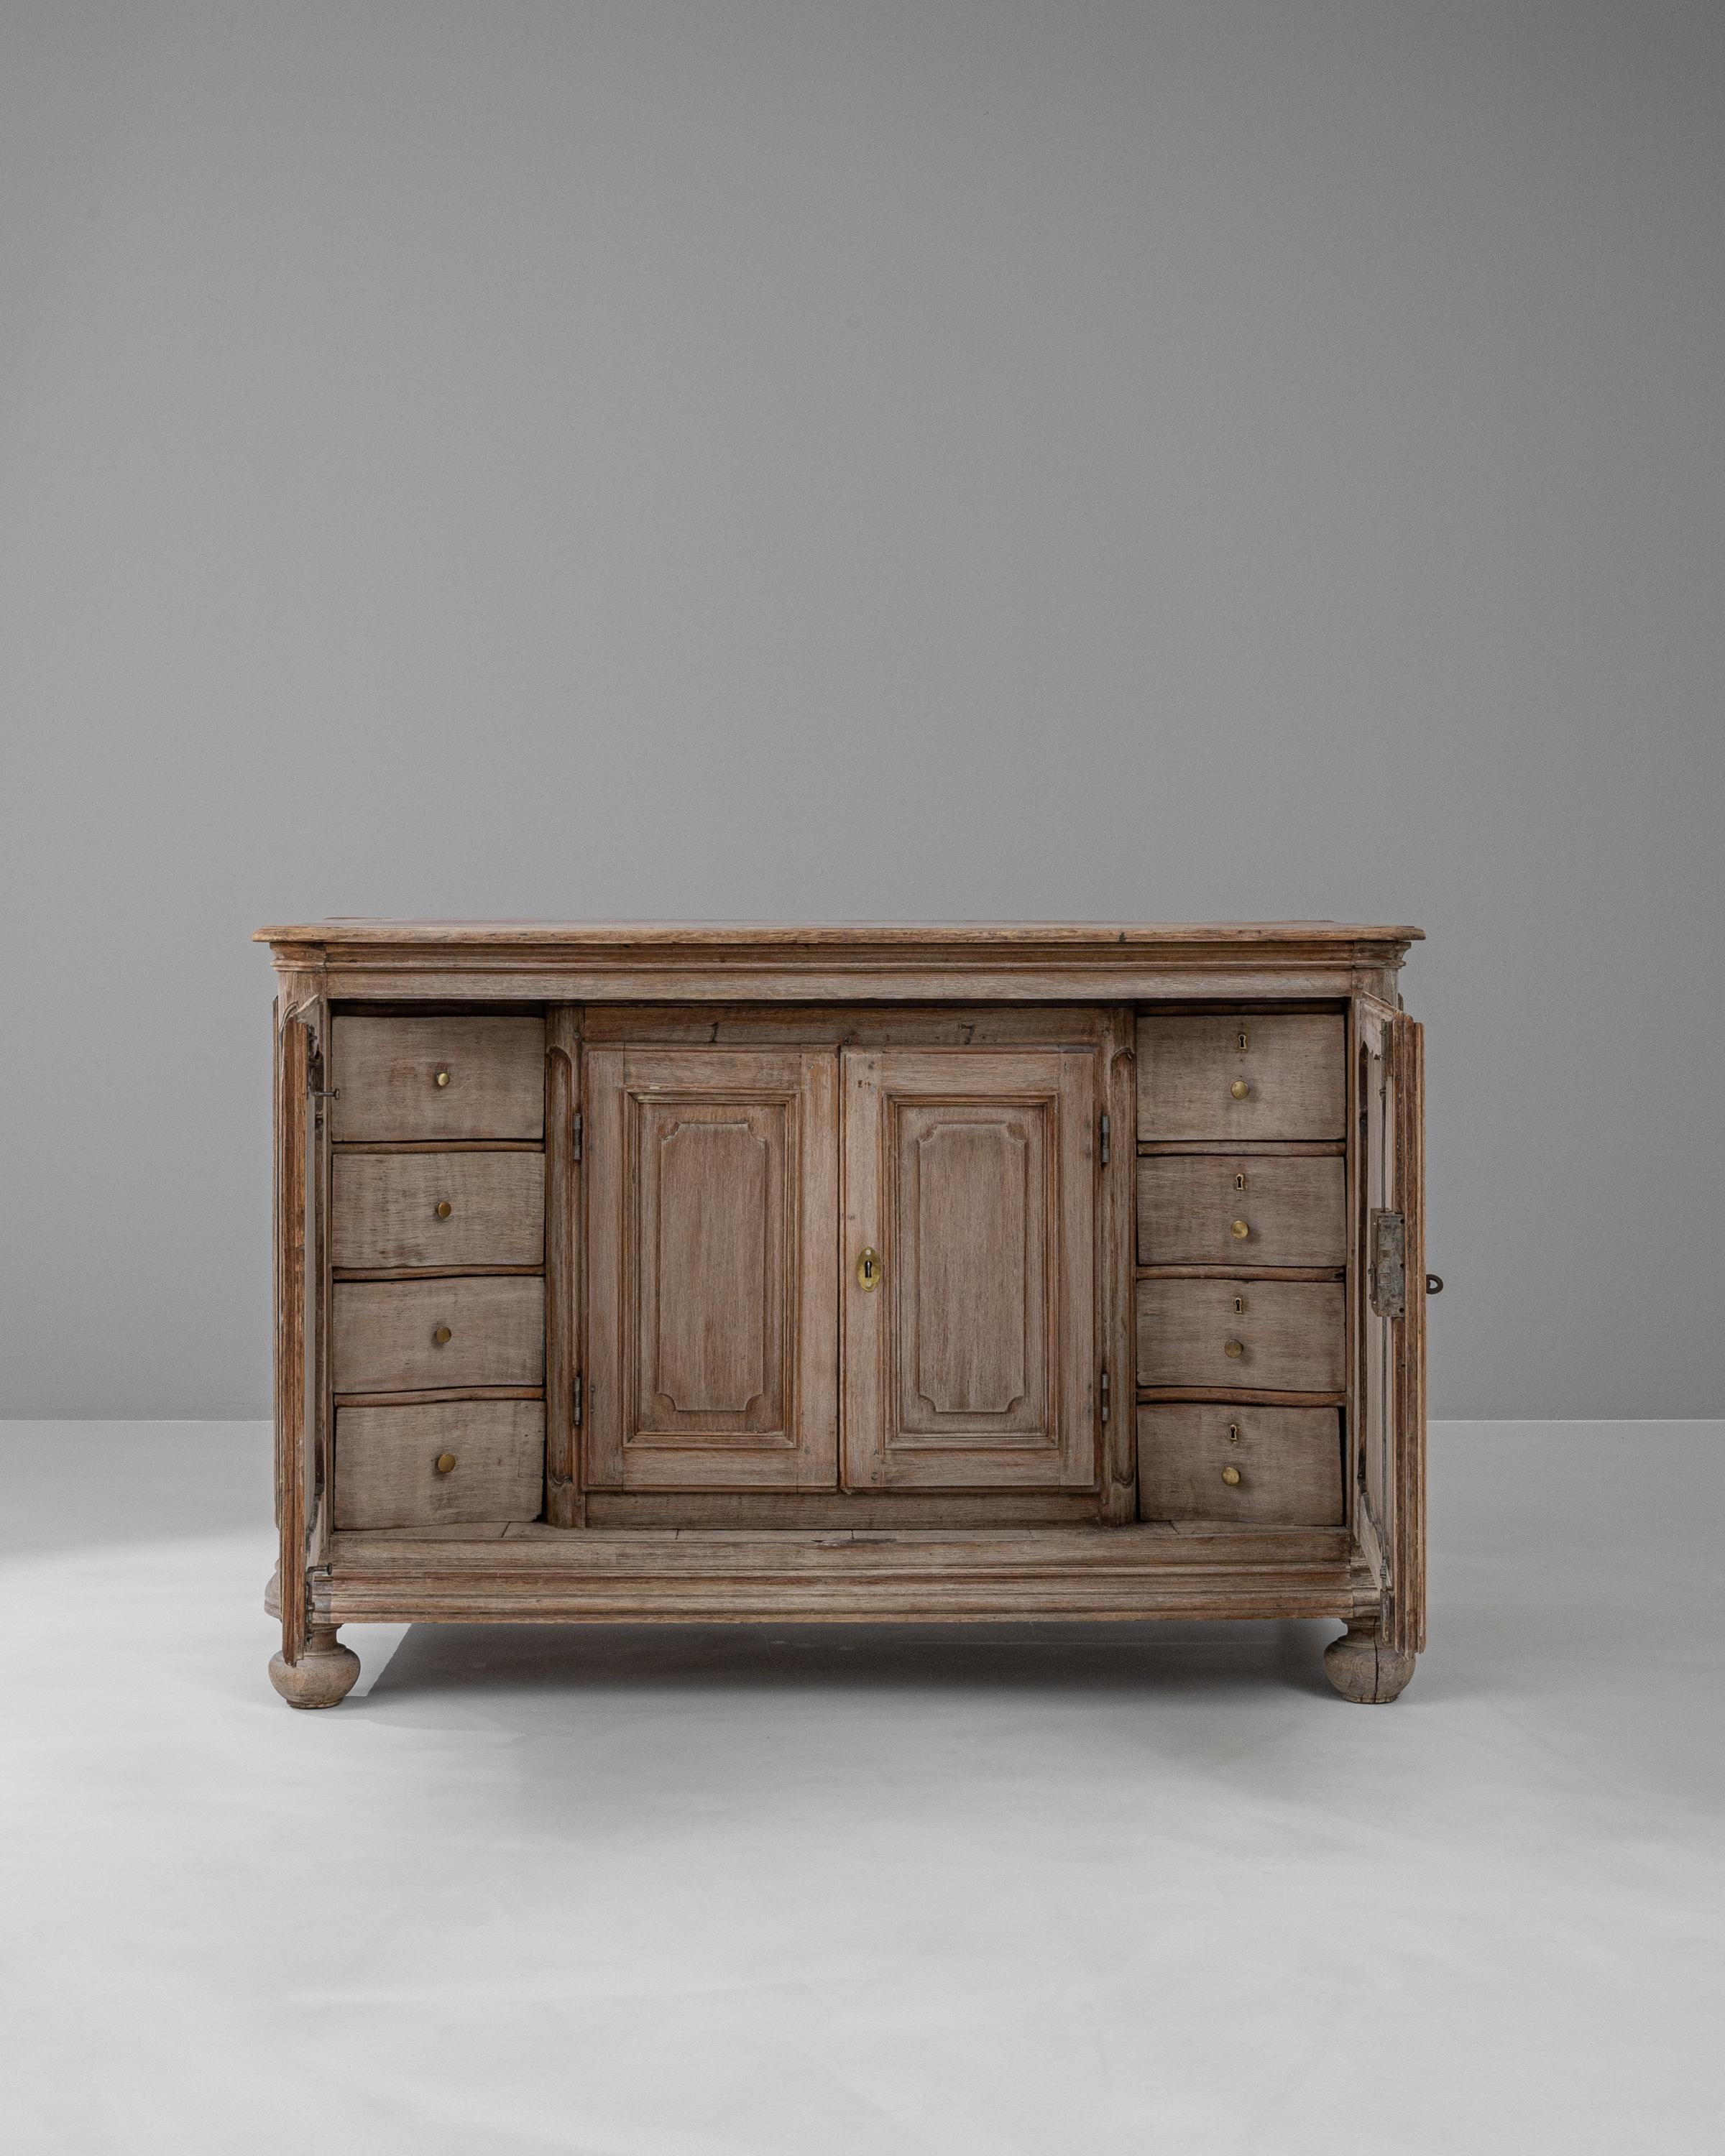 This 19th-century French bleached oak buffet is an exemplar of fine craftsmanship and timeless style, offering both beauty and functionality for any home. Its gently washed finish brings a light, airy feel to the solid oak construction, highlighting